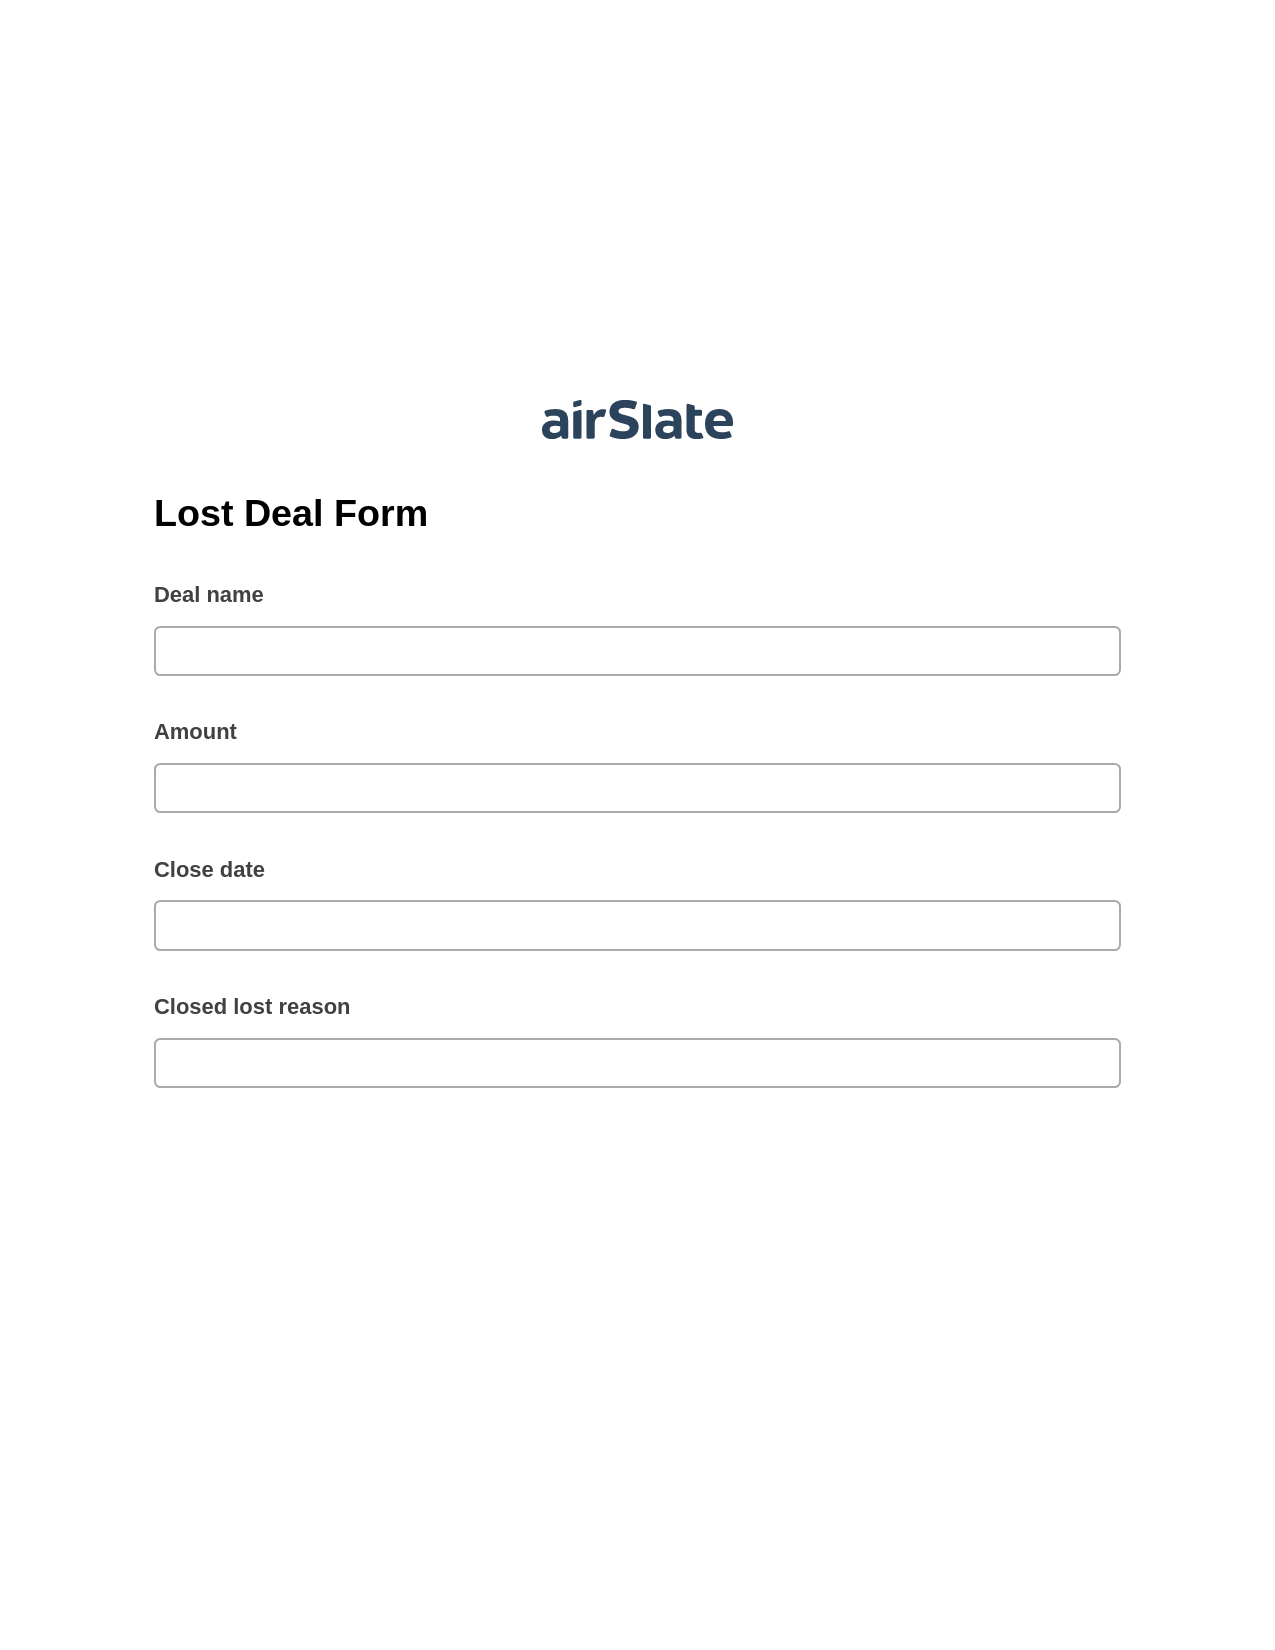 Lost Deal Form Pre-fill from MS Dynamics 365 Records, Add Tags to Slate Bot, Export to NetSuite Bot